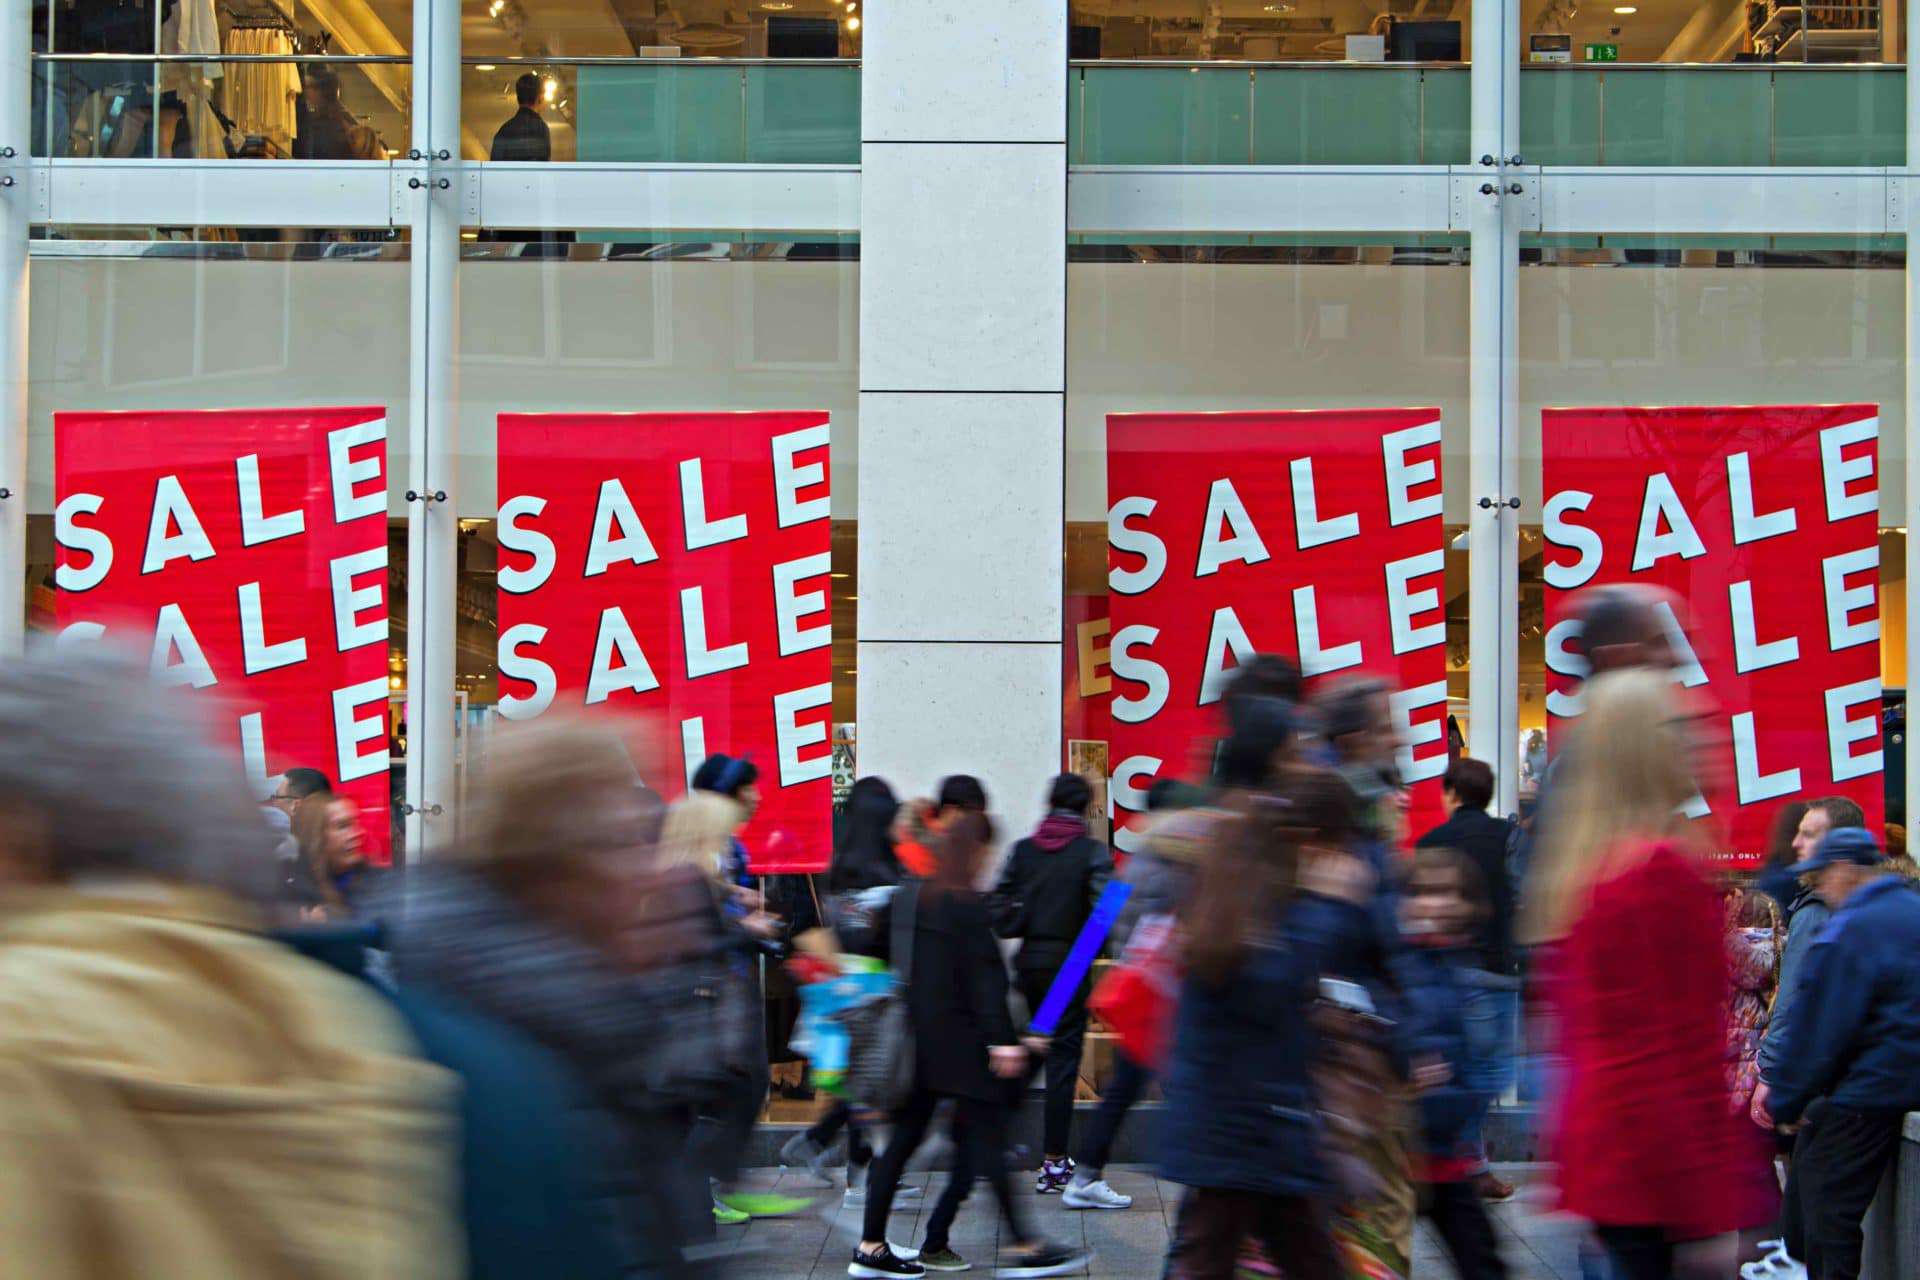 People walk by garish billboards advertising a sale, showing how society is assaulted by consumerism